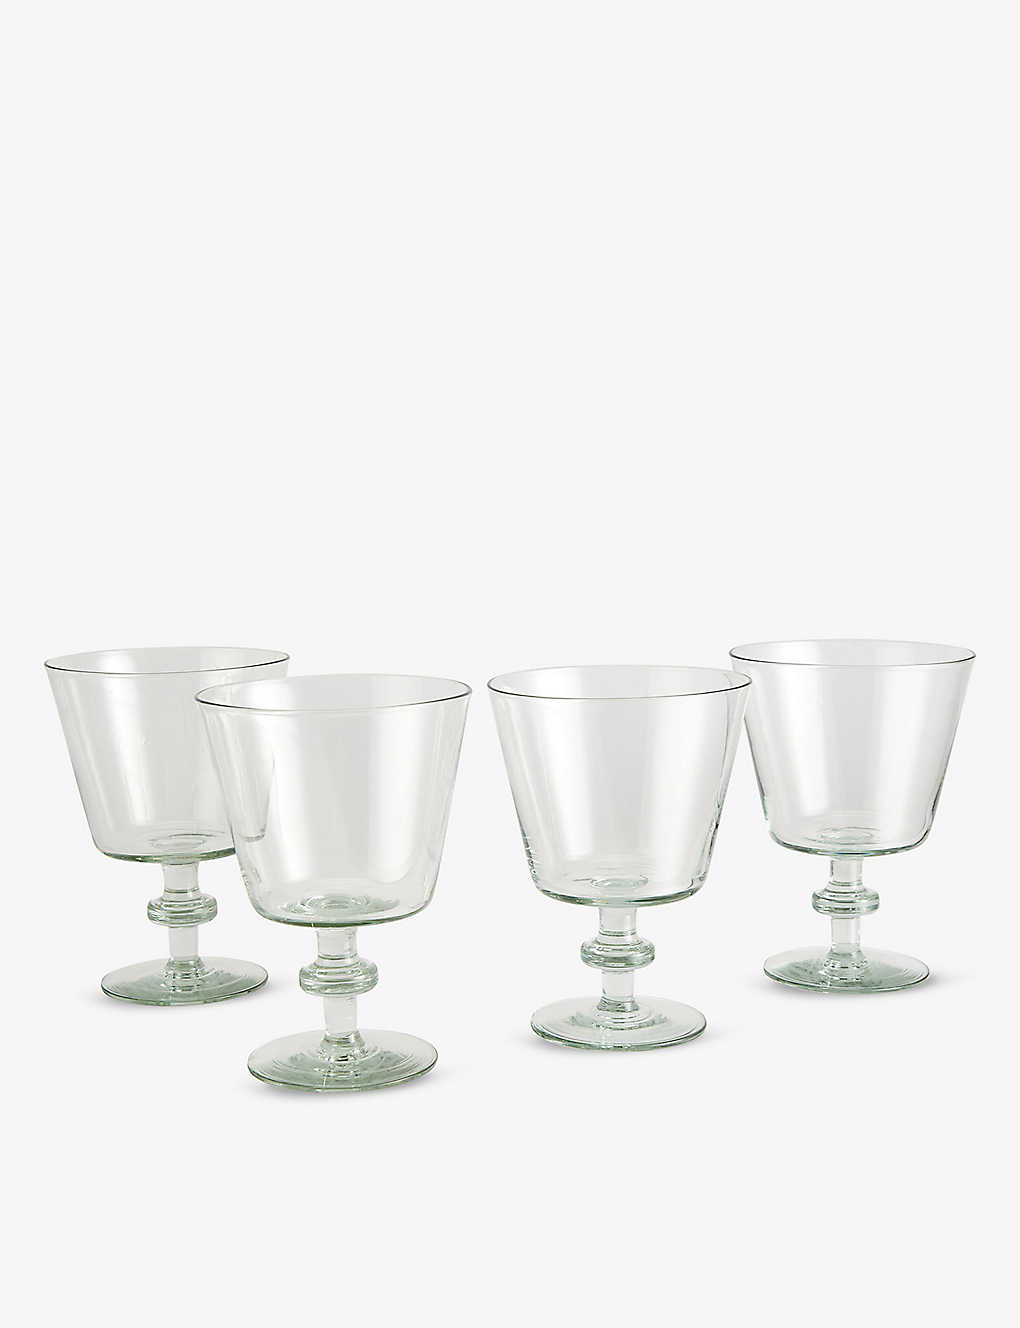 SOHO HOME アヴェネル リサイクルグラス ウォーター グラス 4個セット Avenell recycled-glass water glasses set of four